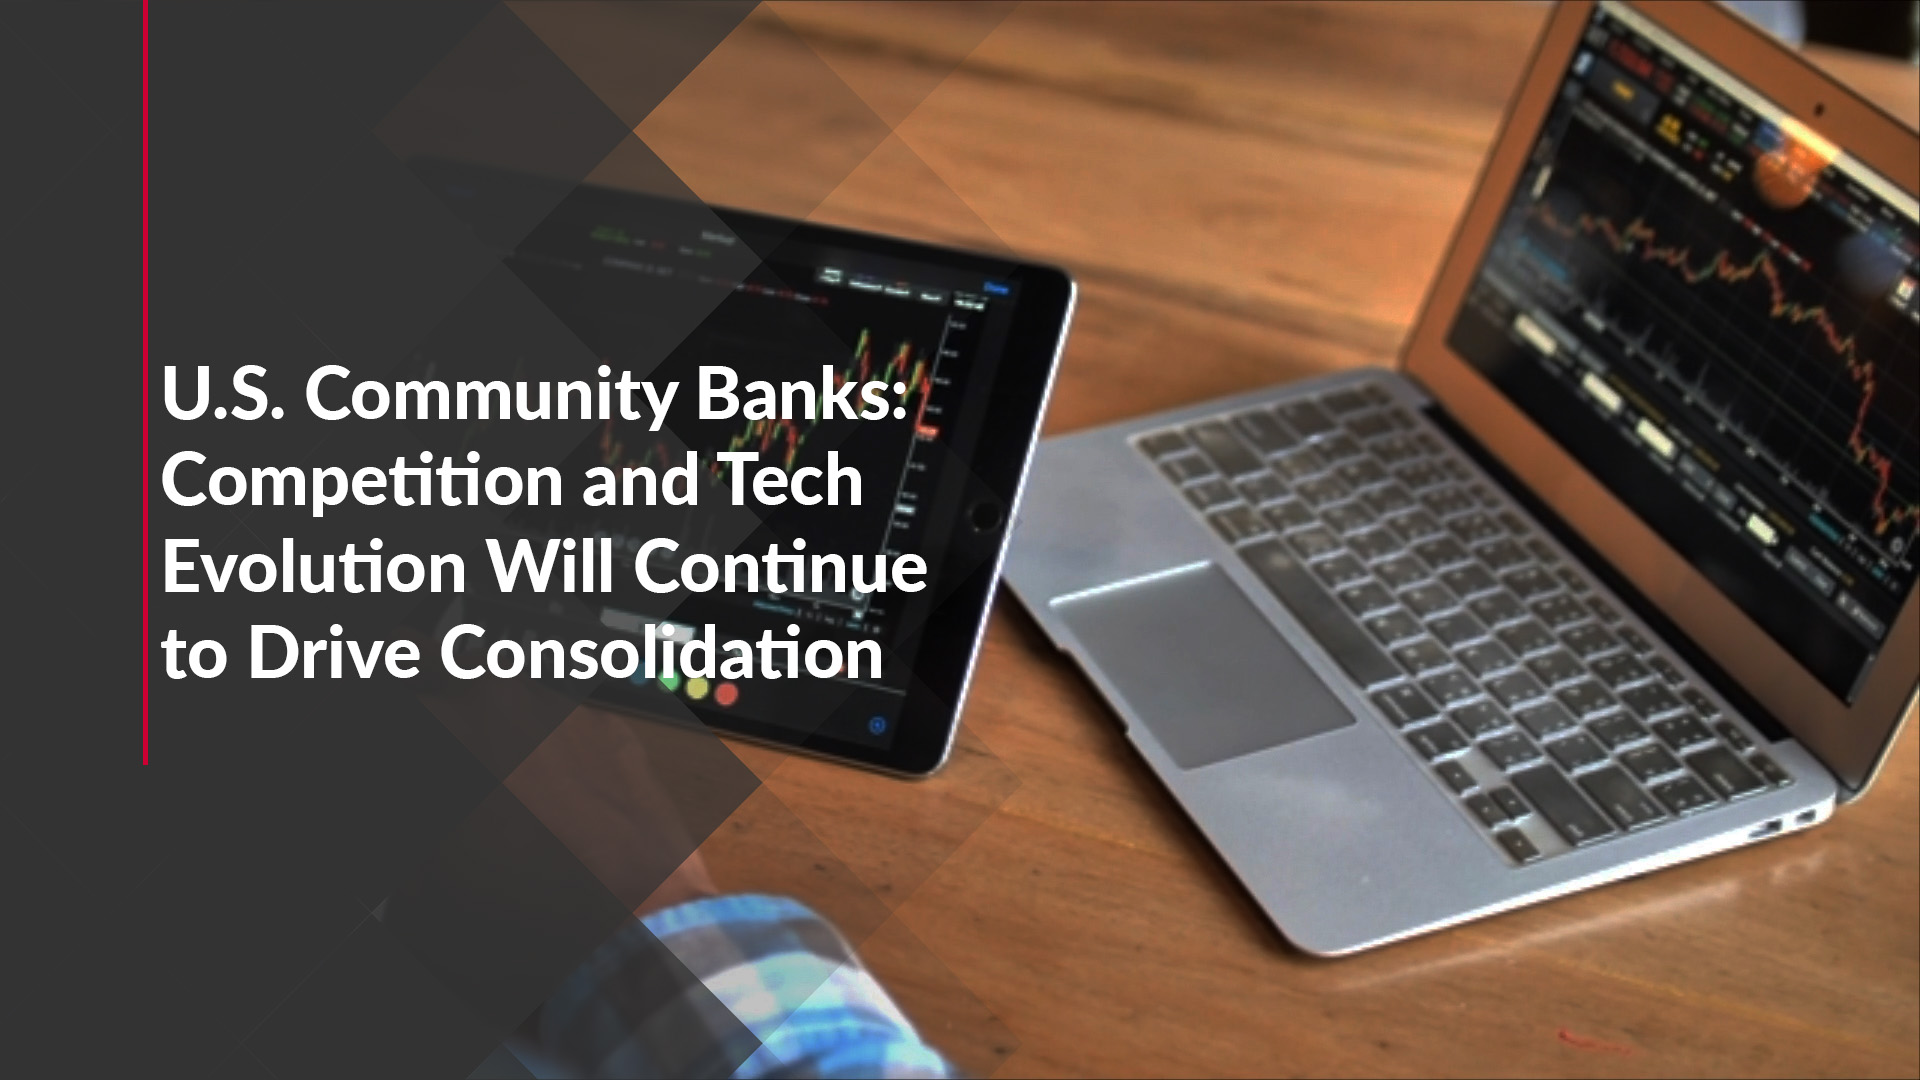 U.S. Community Banks: Competition and Tech Evolution Will Continue to Drive Consolidation